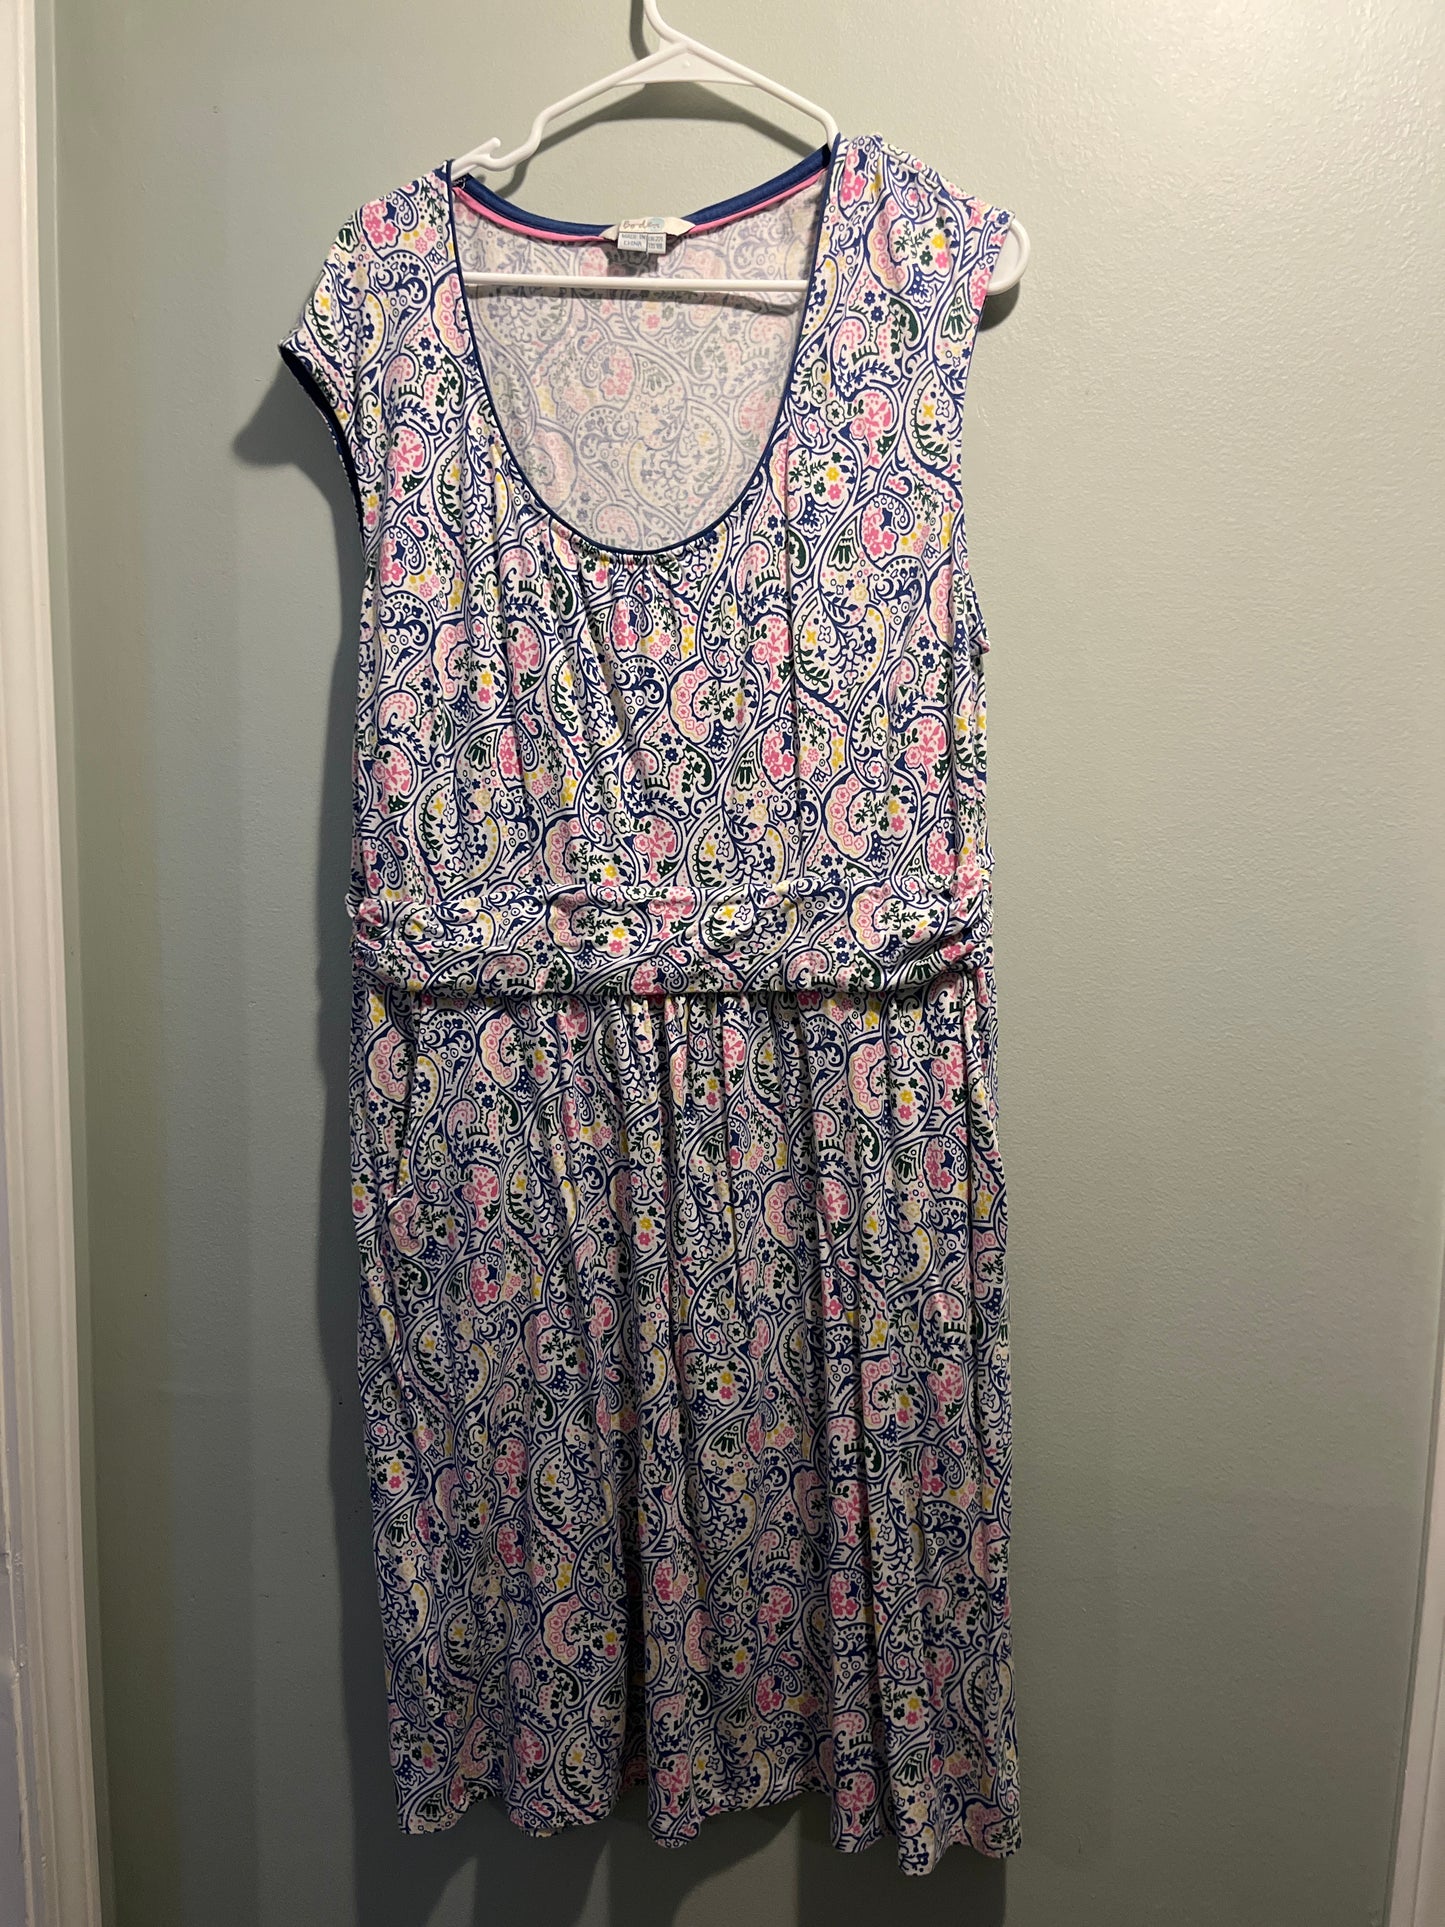 Boden women’s size large